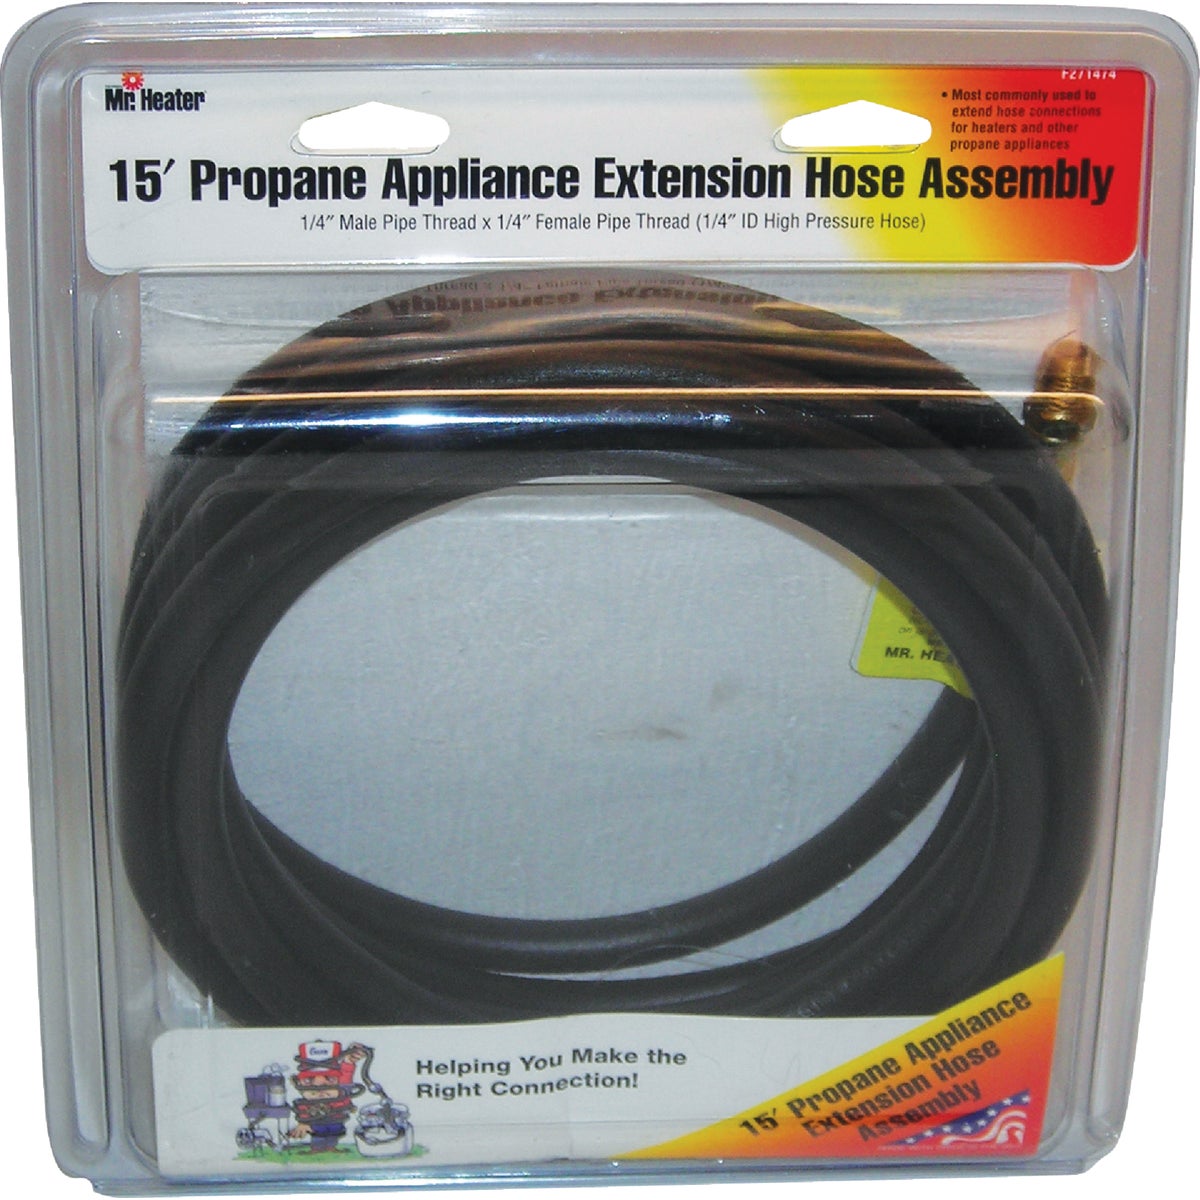 Item 465372, Used in addition to the existing hose for more length between the propane 